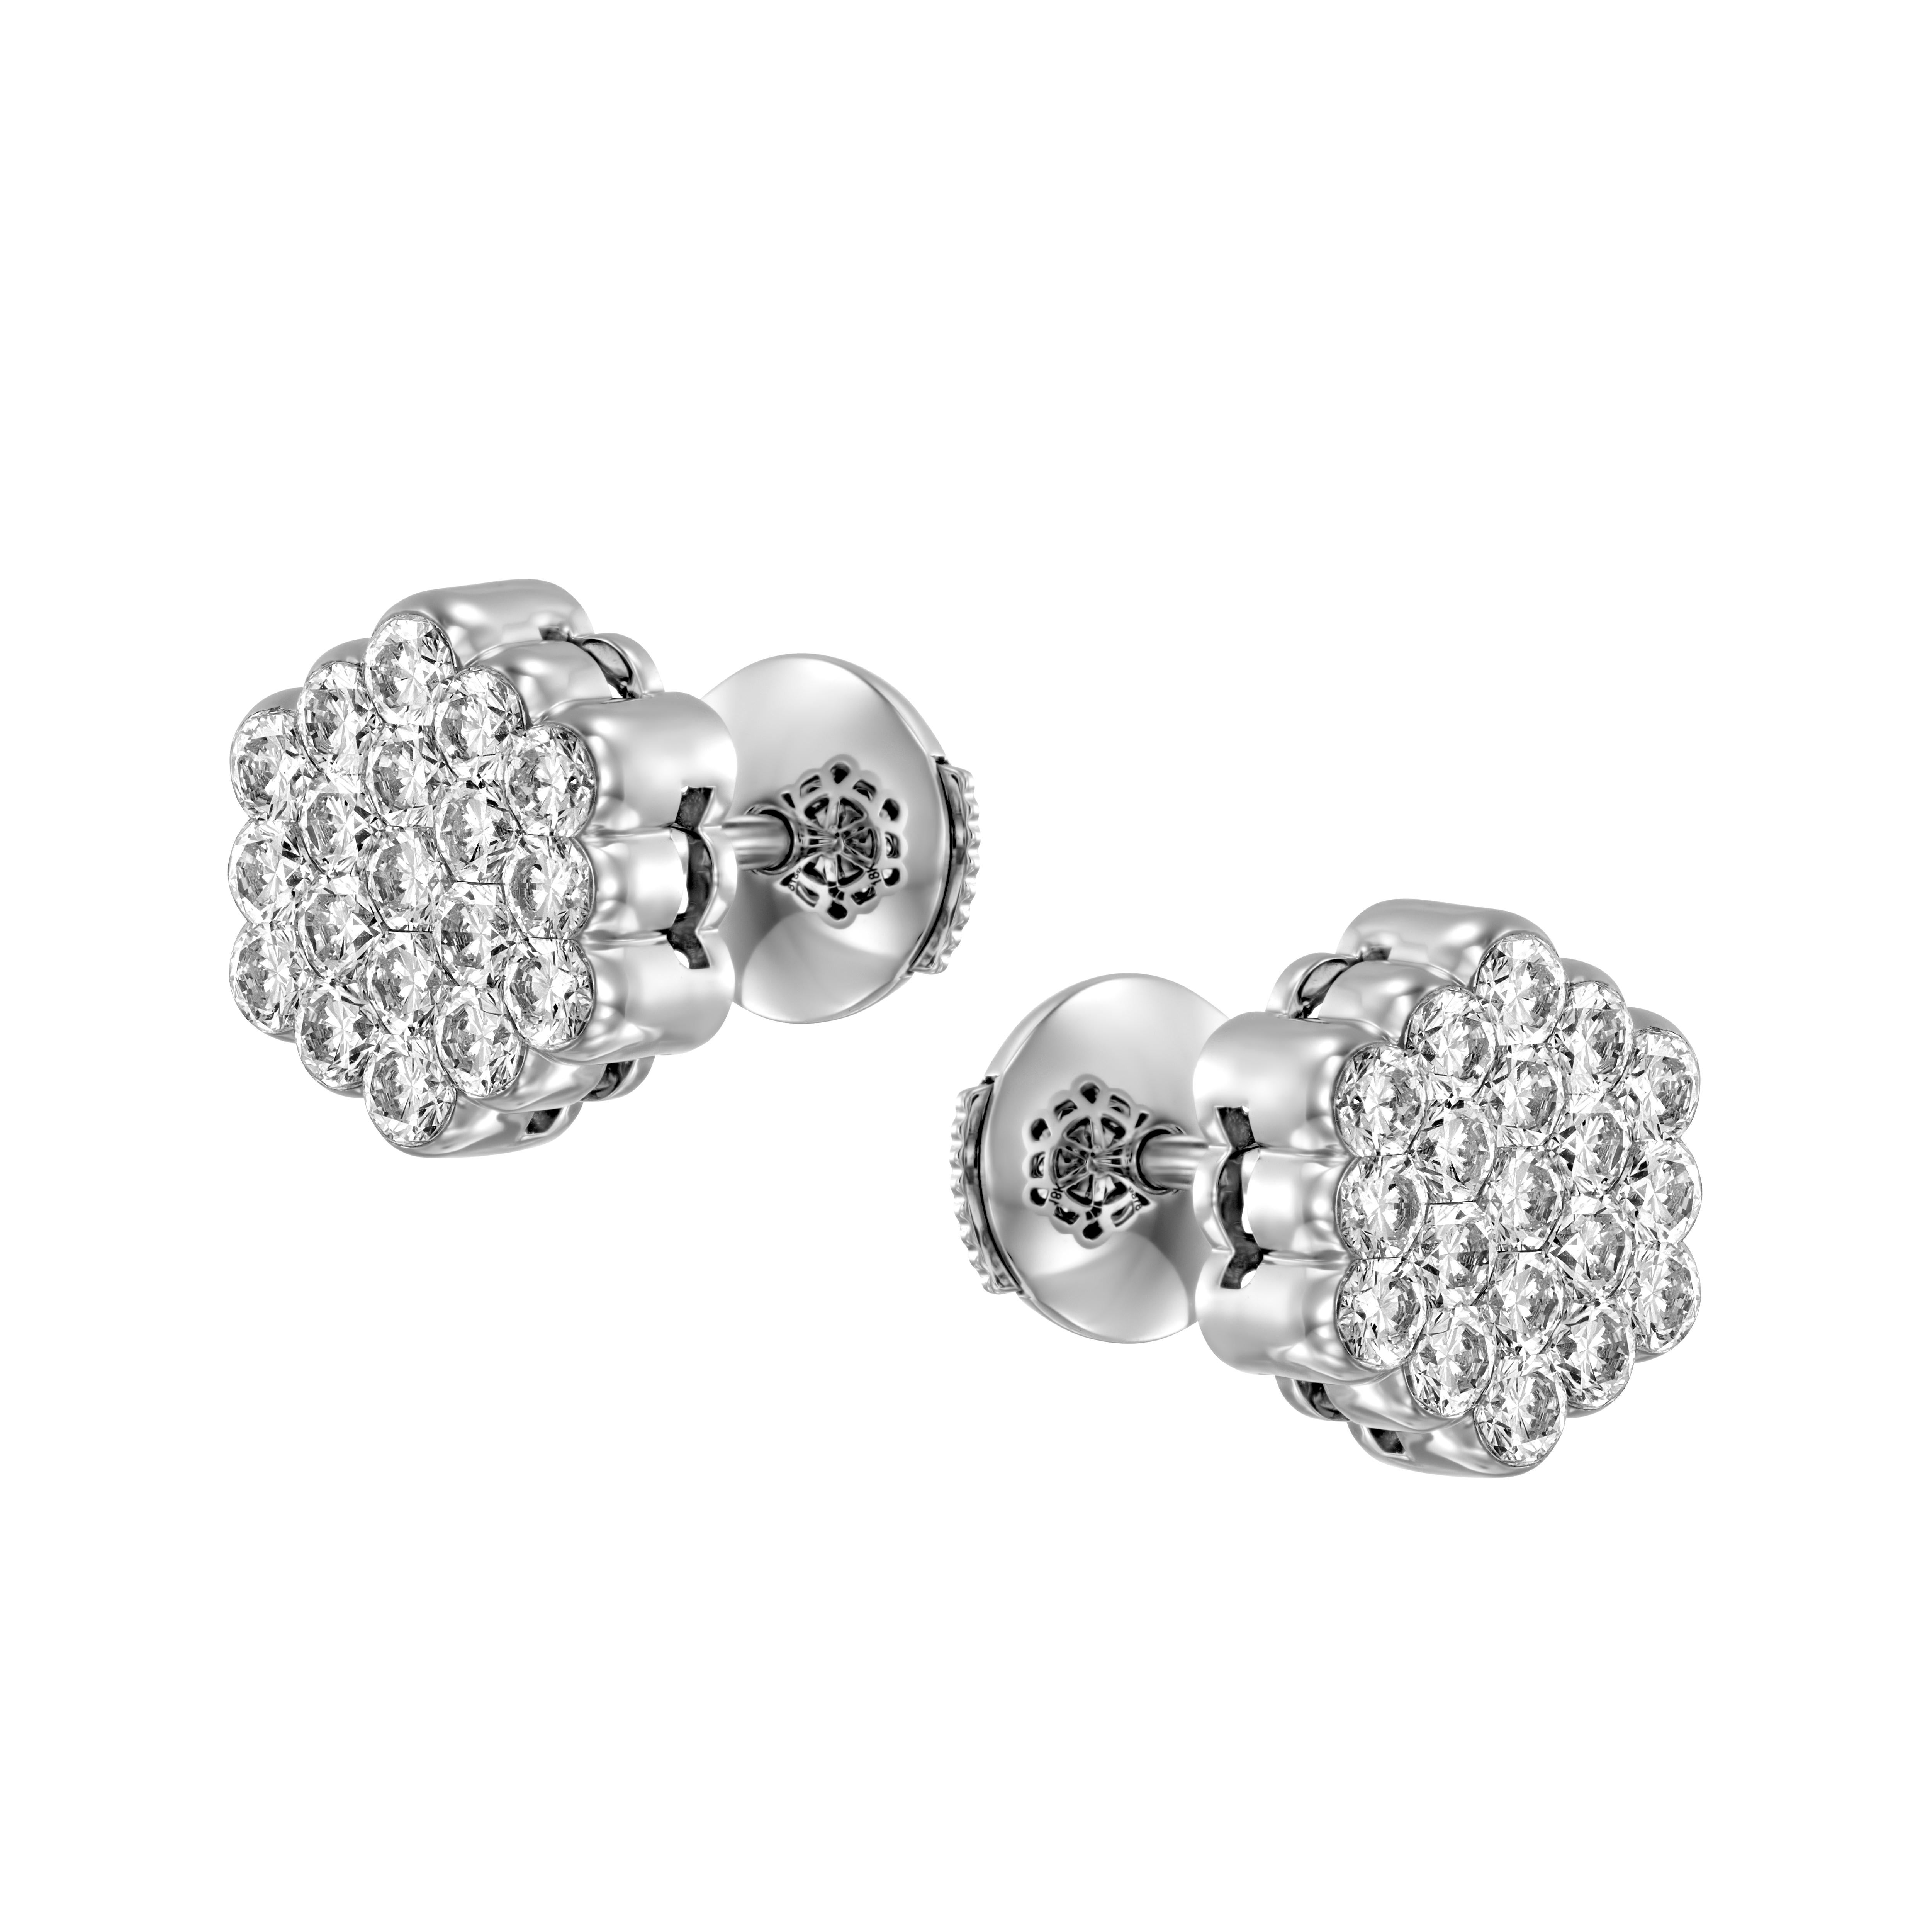 Introducing the captivating Geraldo 1.64 Carat Diamond White Gold Invisible Setting Earrings, a true testament to timeless elegance and exceptional craftsmanship. Crafted with meticulous attention to detail, these earrings are designed to enhance